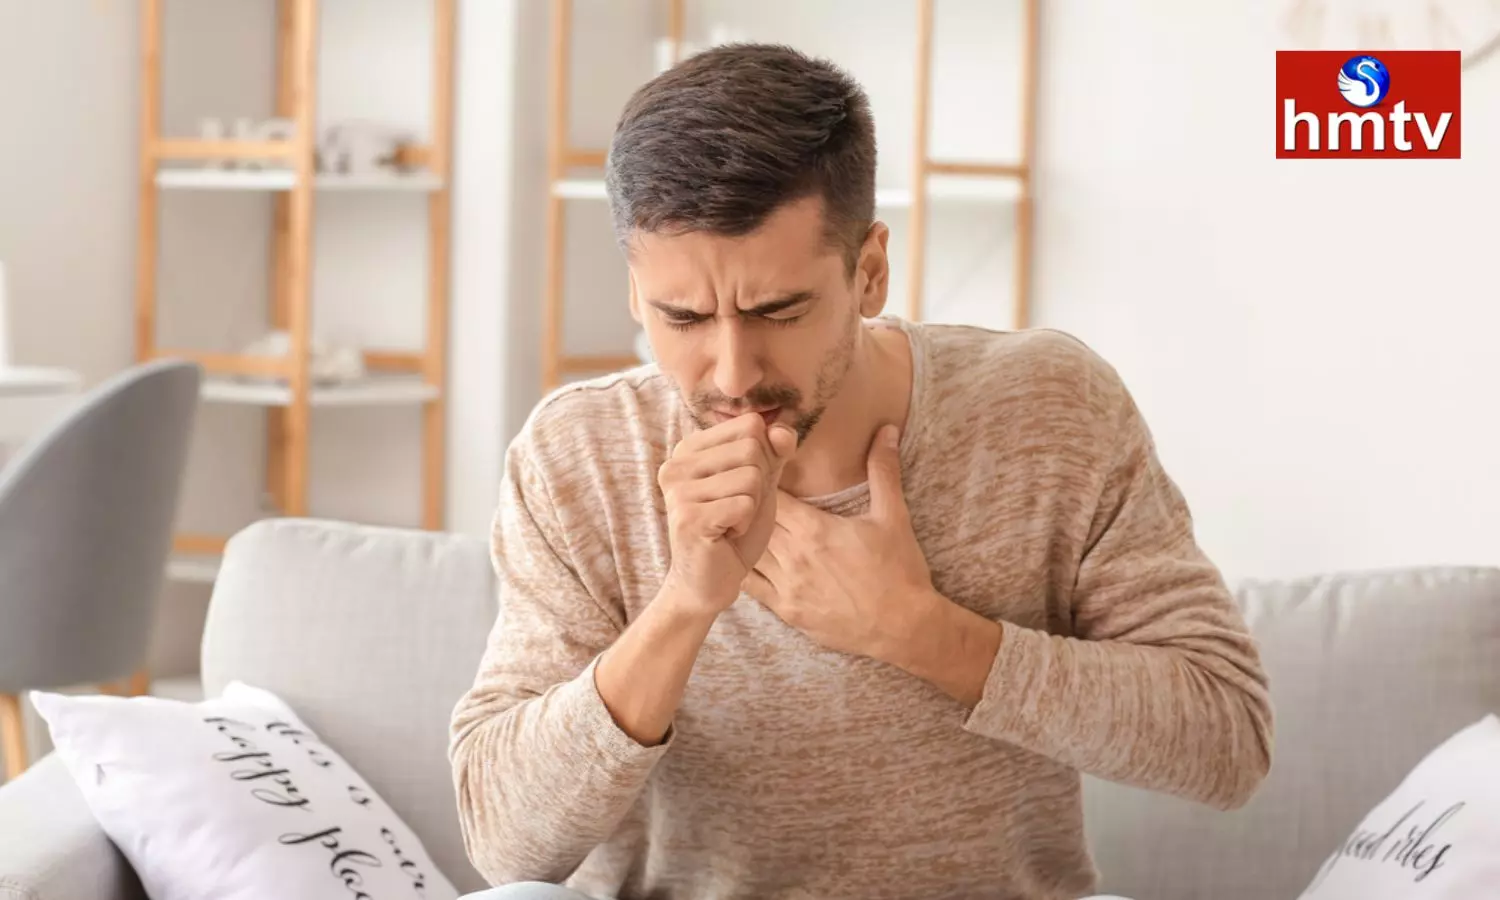 If The Cough Caused By H3N2 Virus Does Not Subside This Test Should Be Done Immediately Or There Will Be a Lot Of Danger